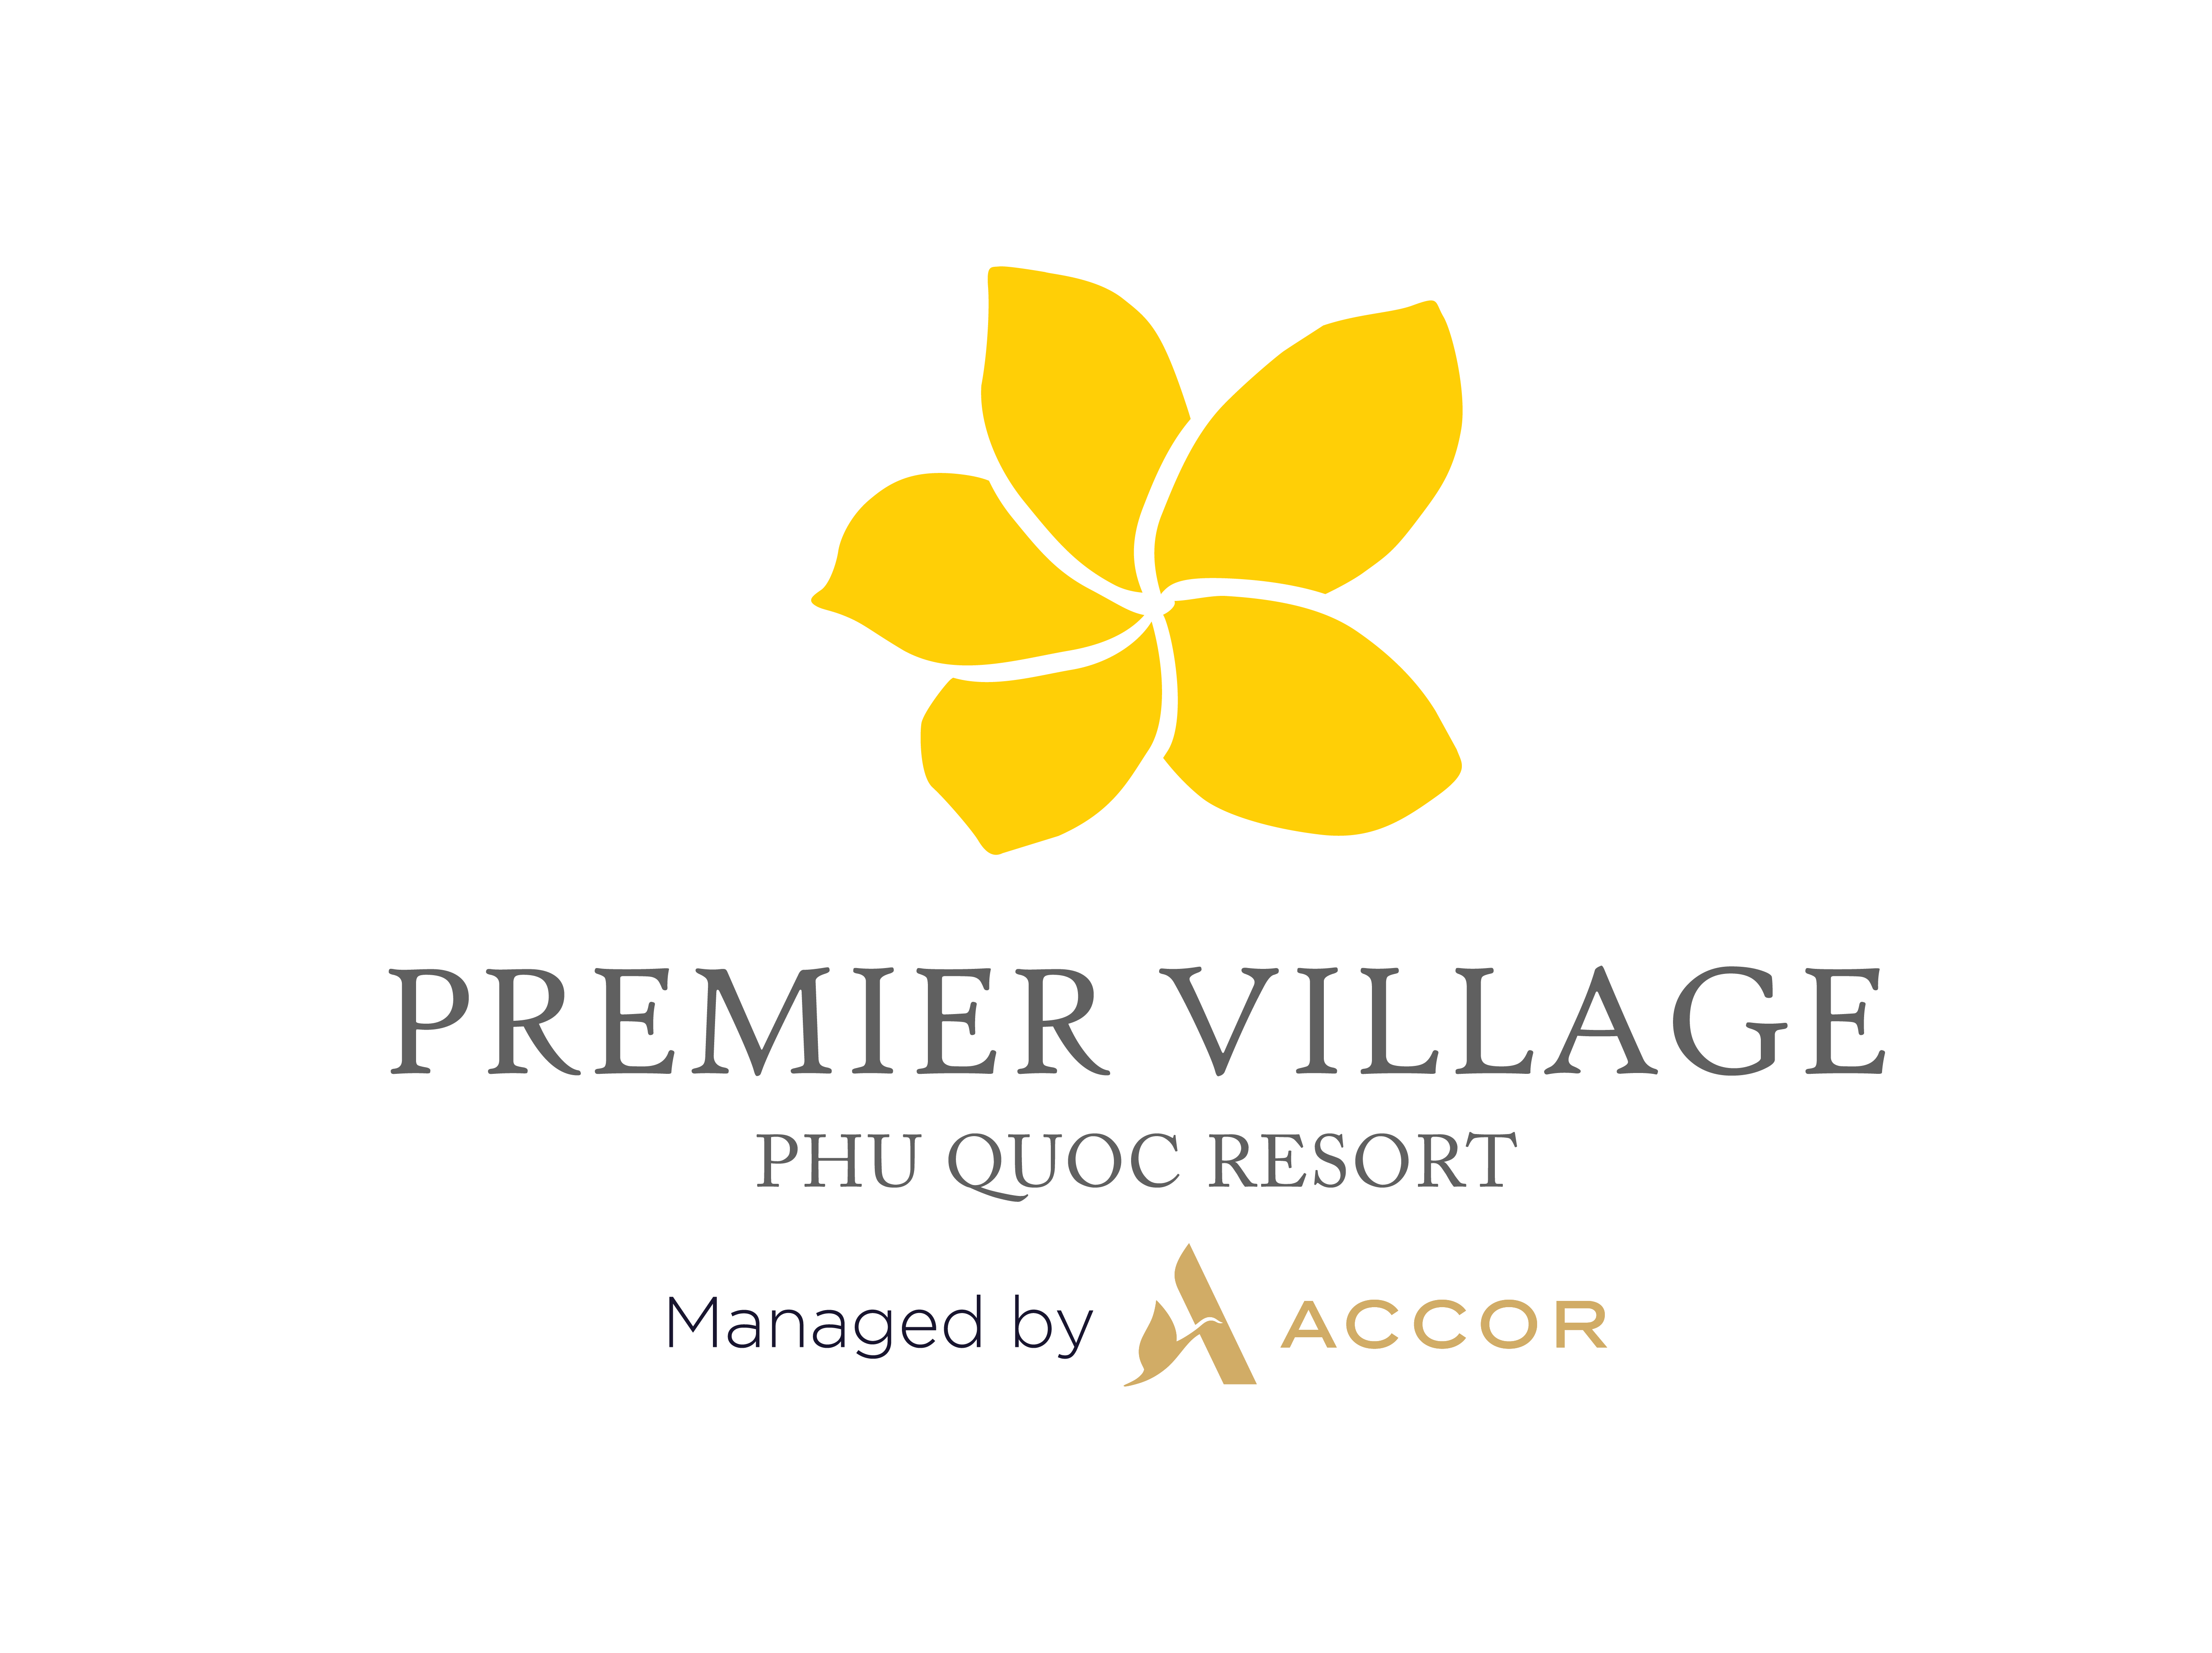 Premier Village Phu Quoc Resort managed by Accor